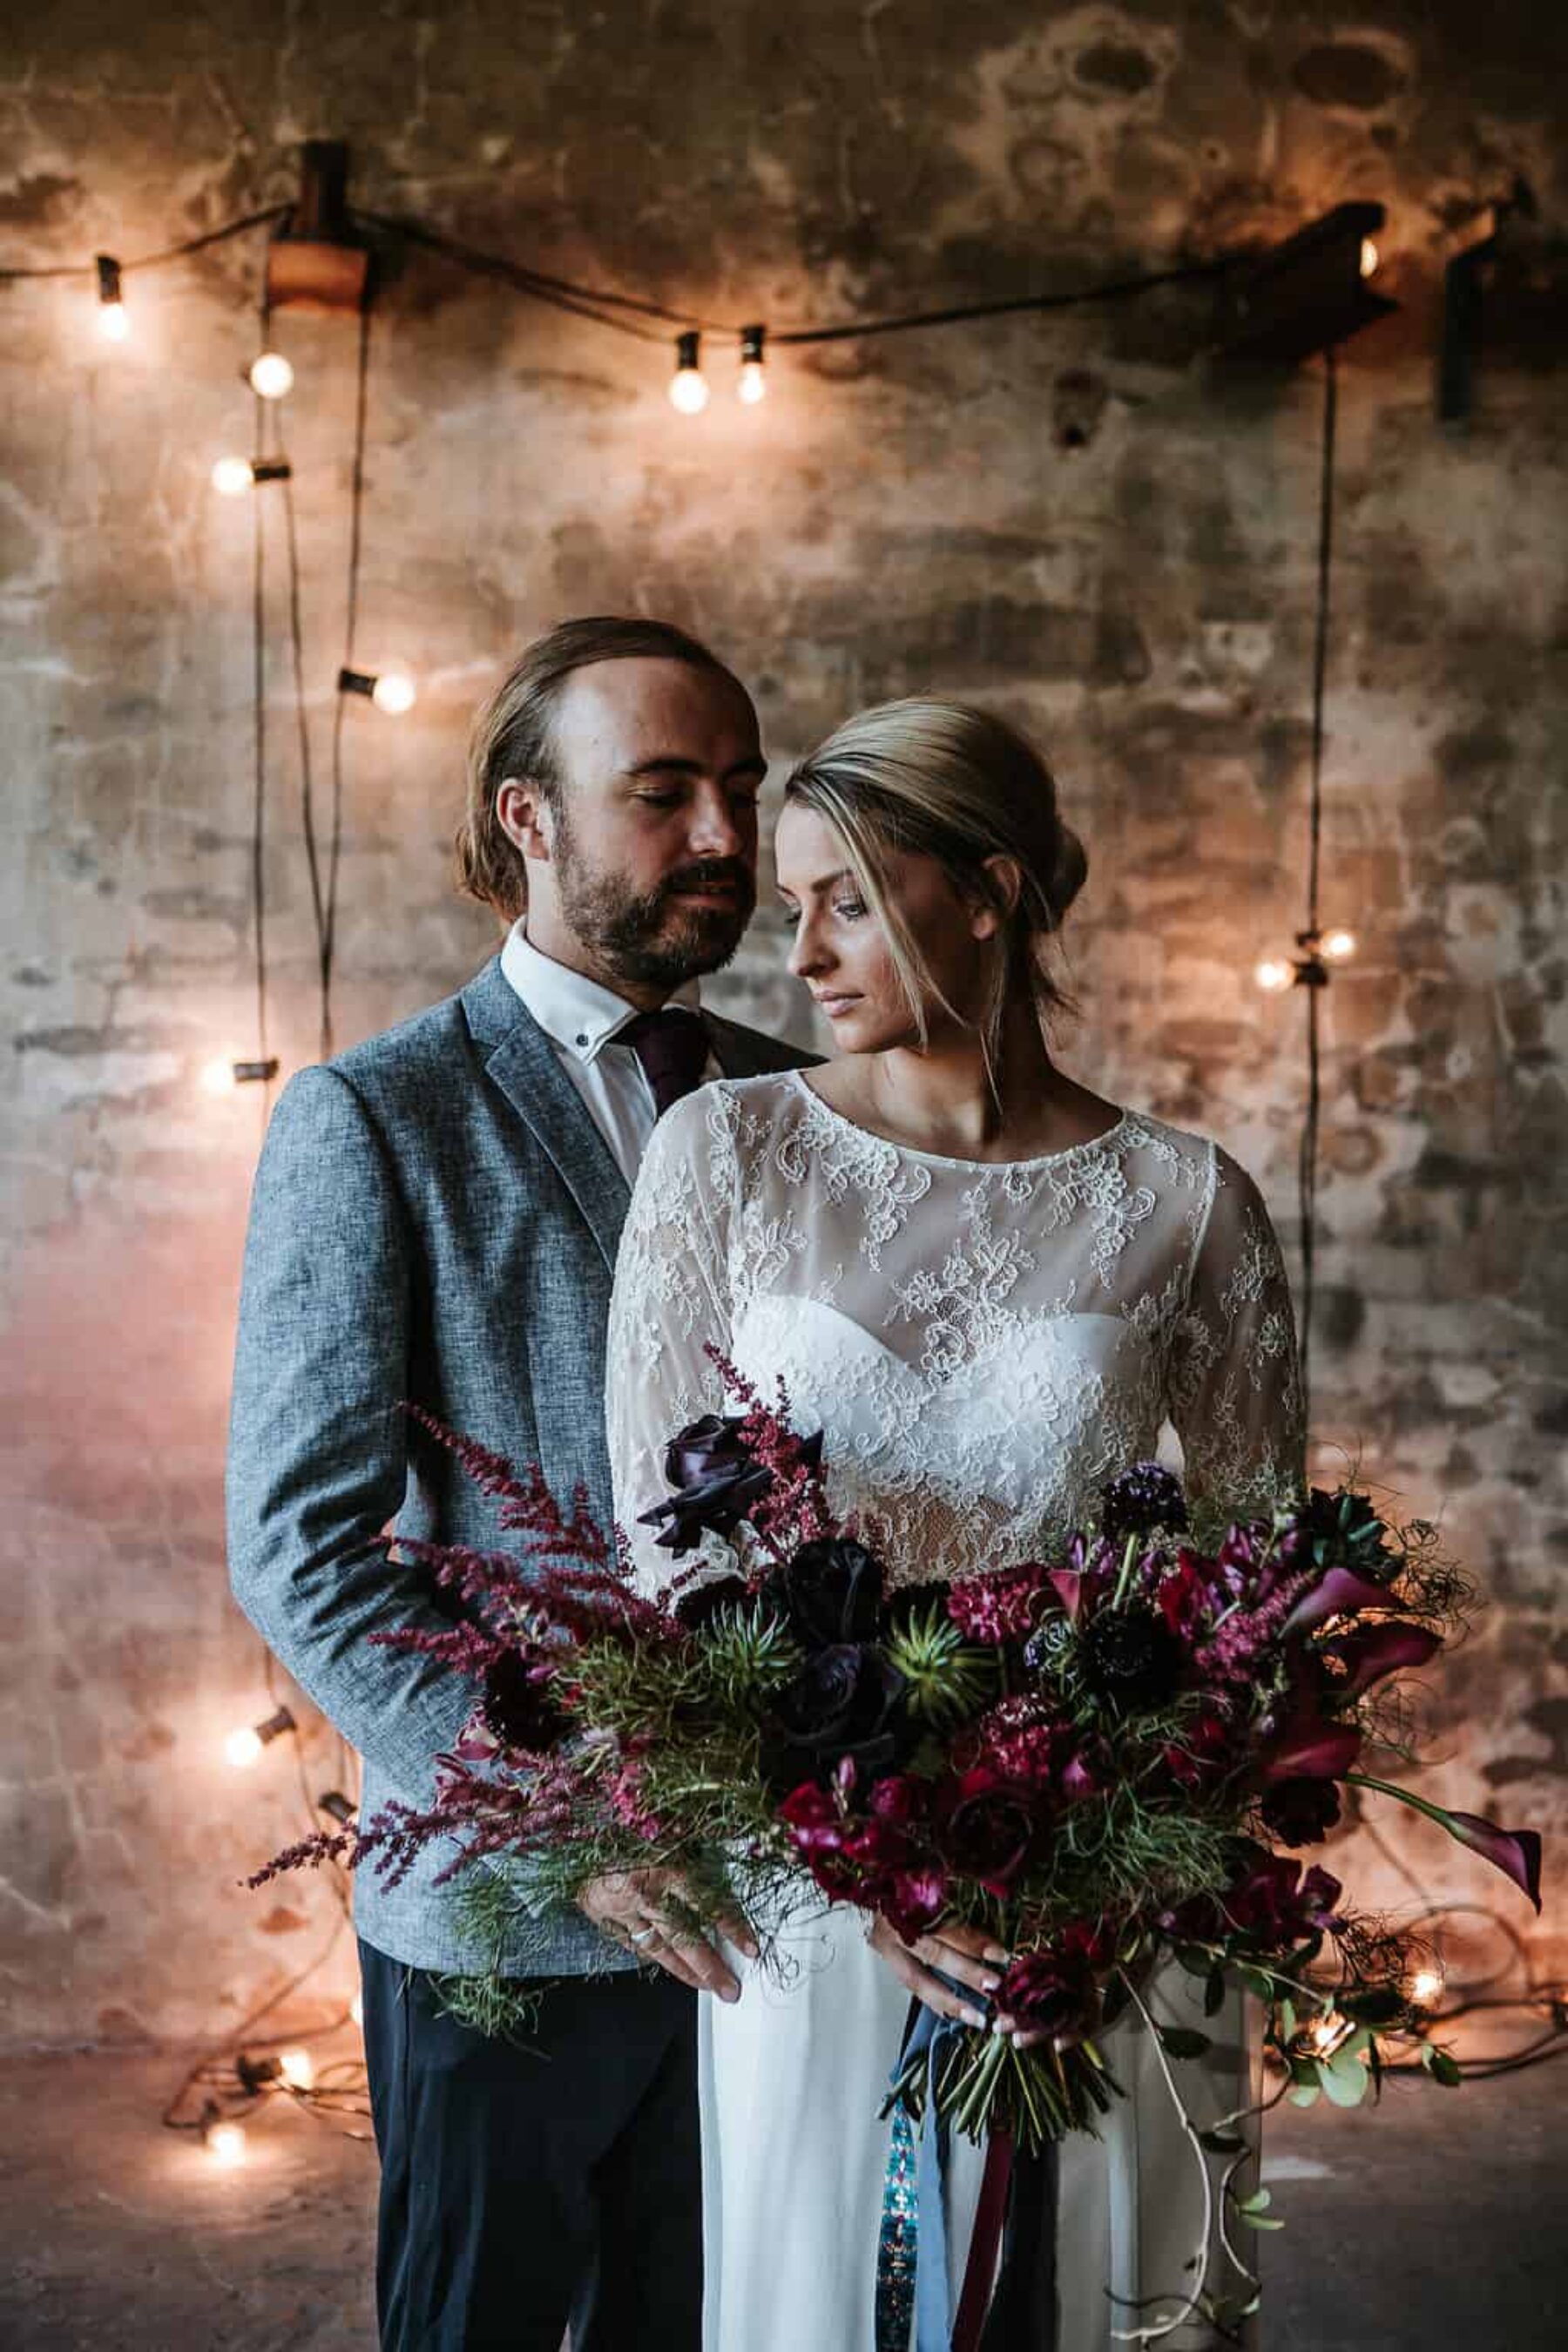 Moody industrial wedding at The Cooperative 1888